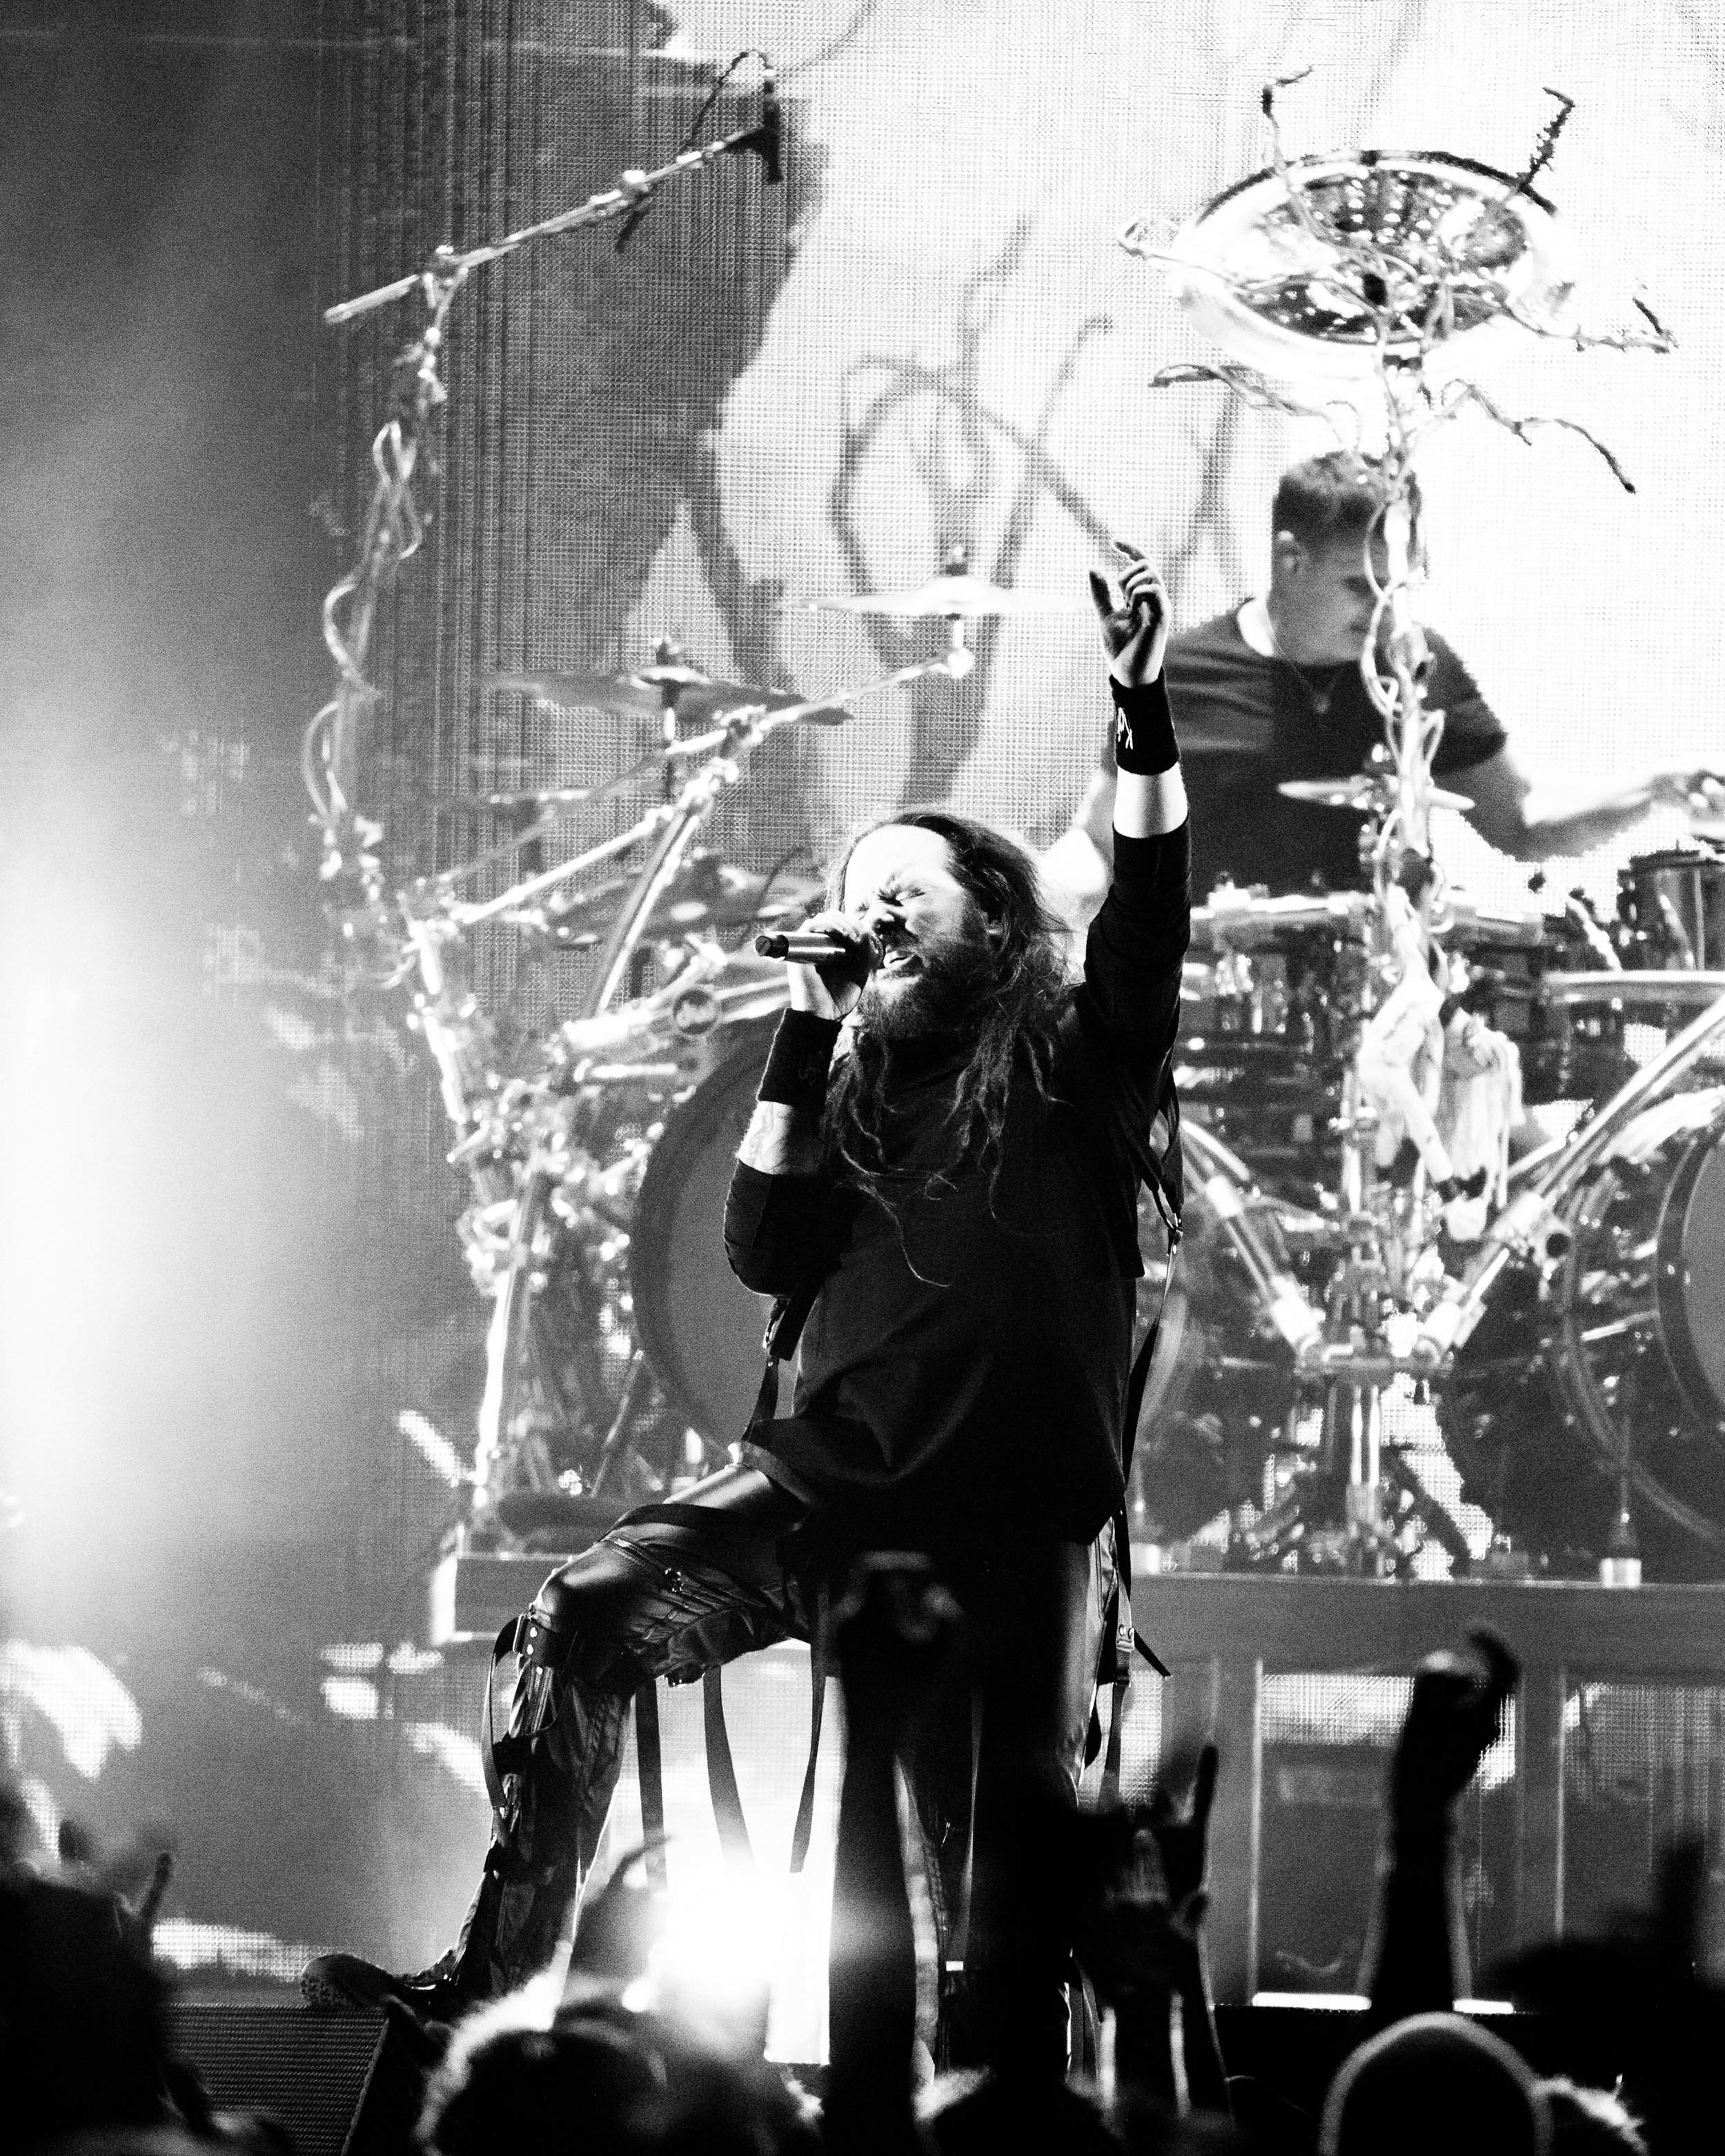 KORN - 2022 NORTH AMERICAN TOUR - Ball Arena - Denver, Colorado - Tuesday, August 16, 2022 - PHOTO BY Mowgli Miles of Interracial Friends - PHOTO BY Mowgli Miles of Interracial Friends-161.JPG